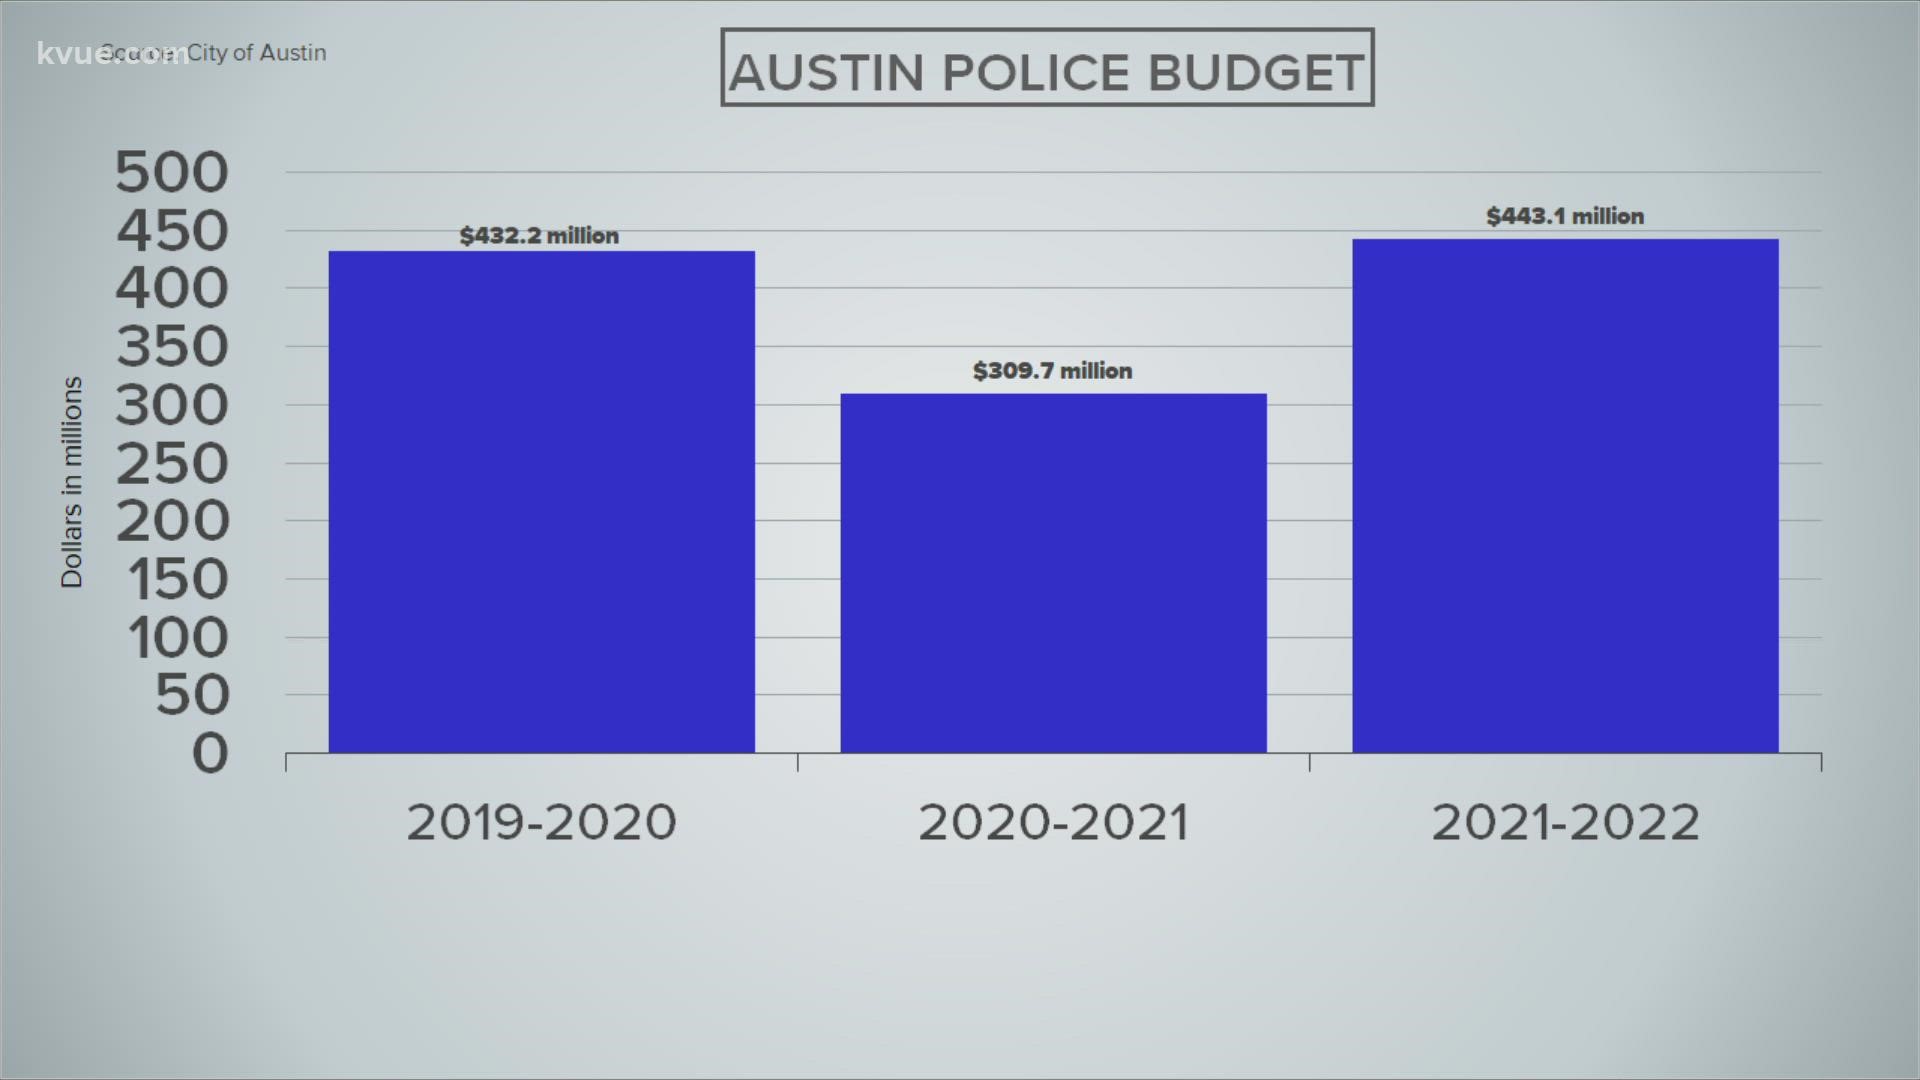 The Austin City Council unanimously approved the budget for fiscal year 2021-22 on Aug. 12.